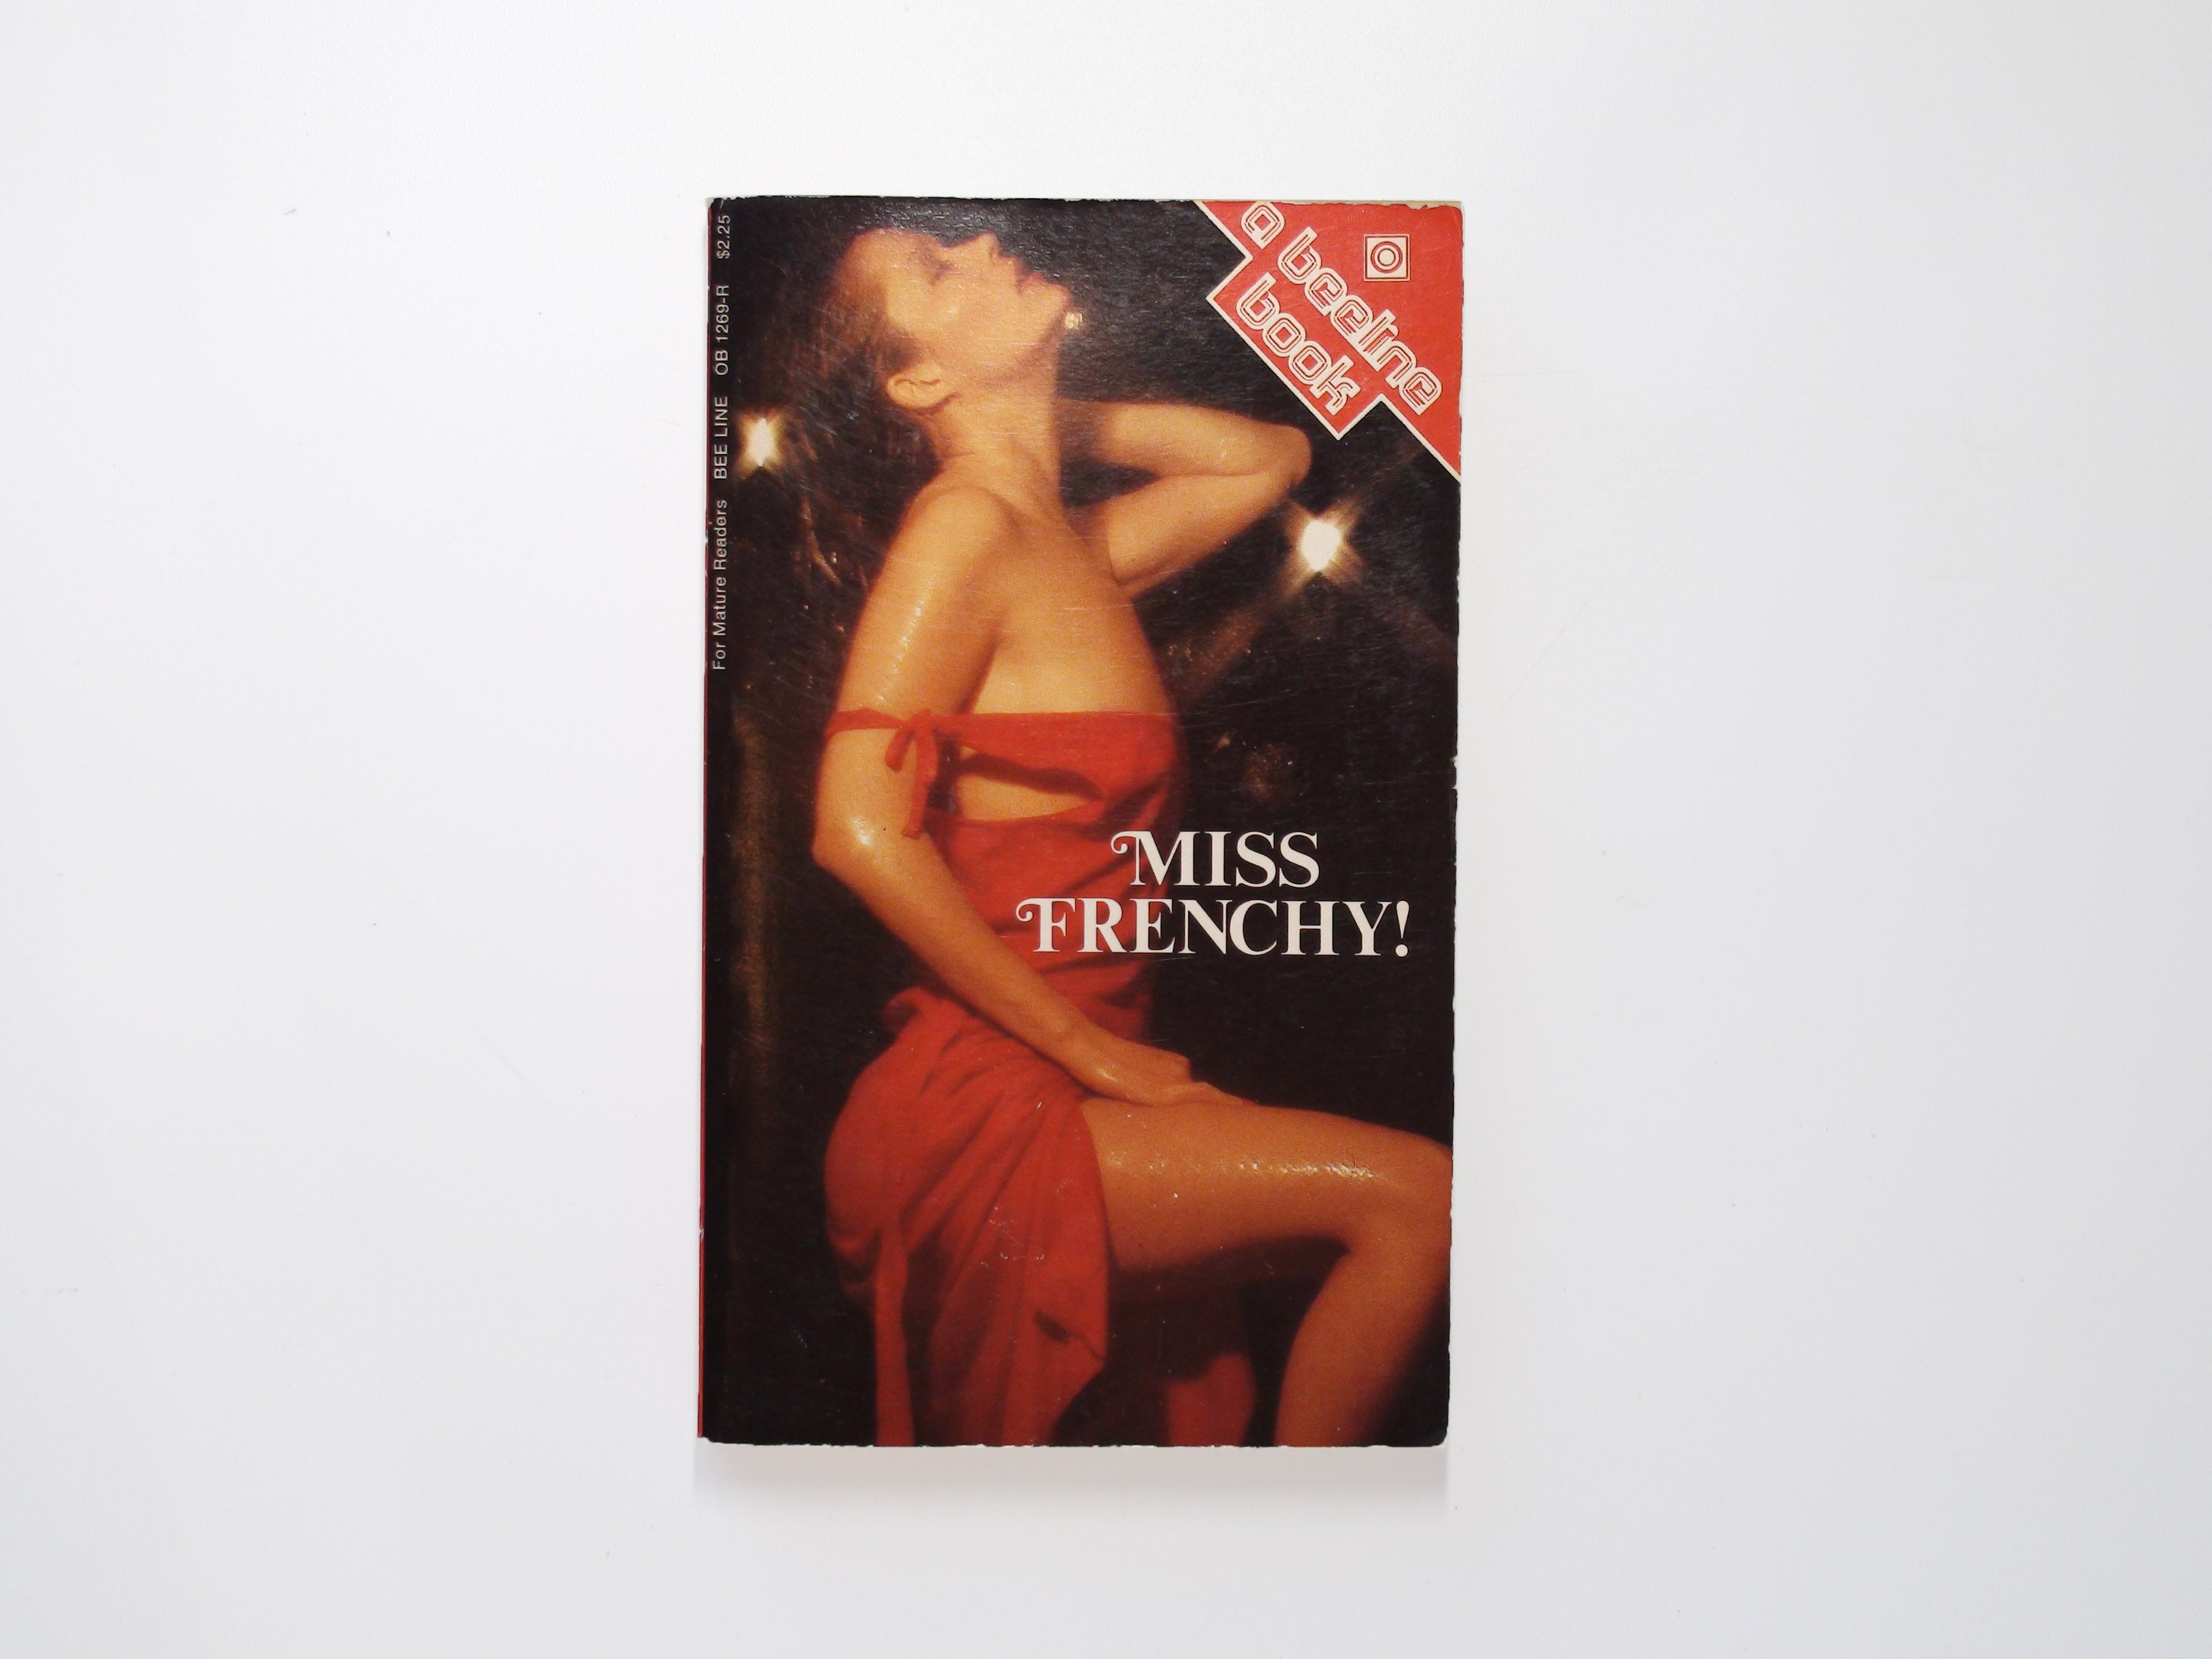 Miss Frenchy, by Stewart Lailowe, A Beeline Book, Erotica, Paperback, 1977